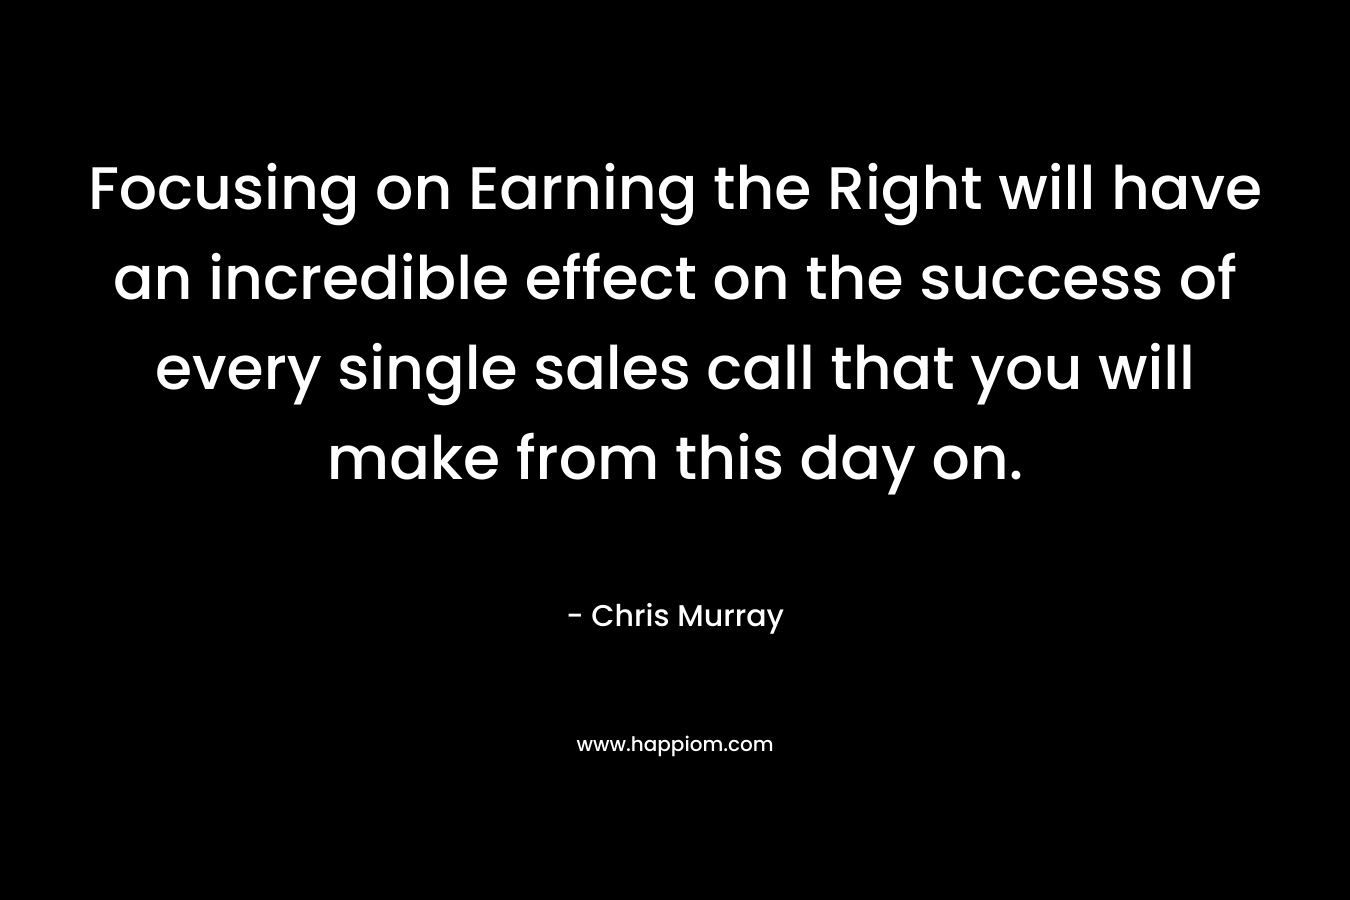 Focusing on Earning the Right will have an incredible effect on the success of every single sales call that you will make from this day on.